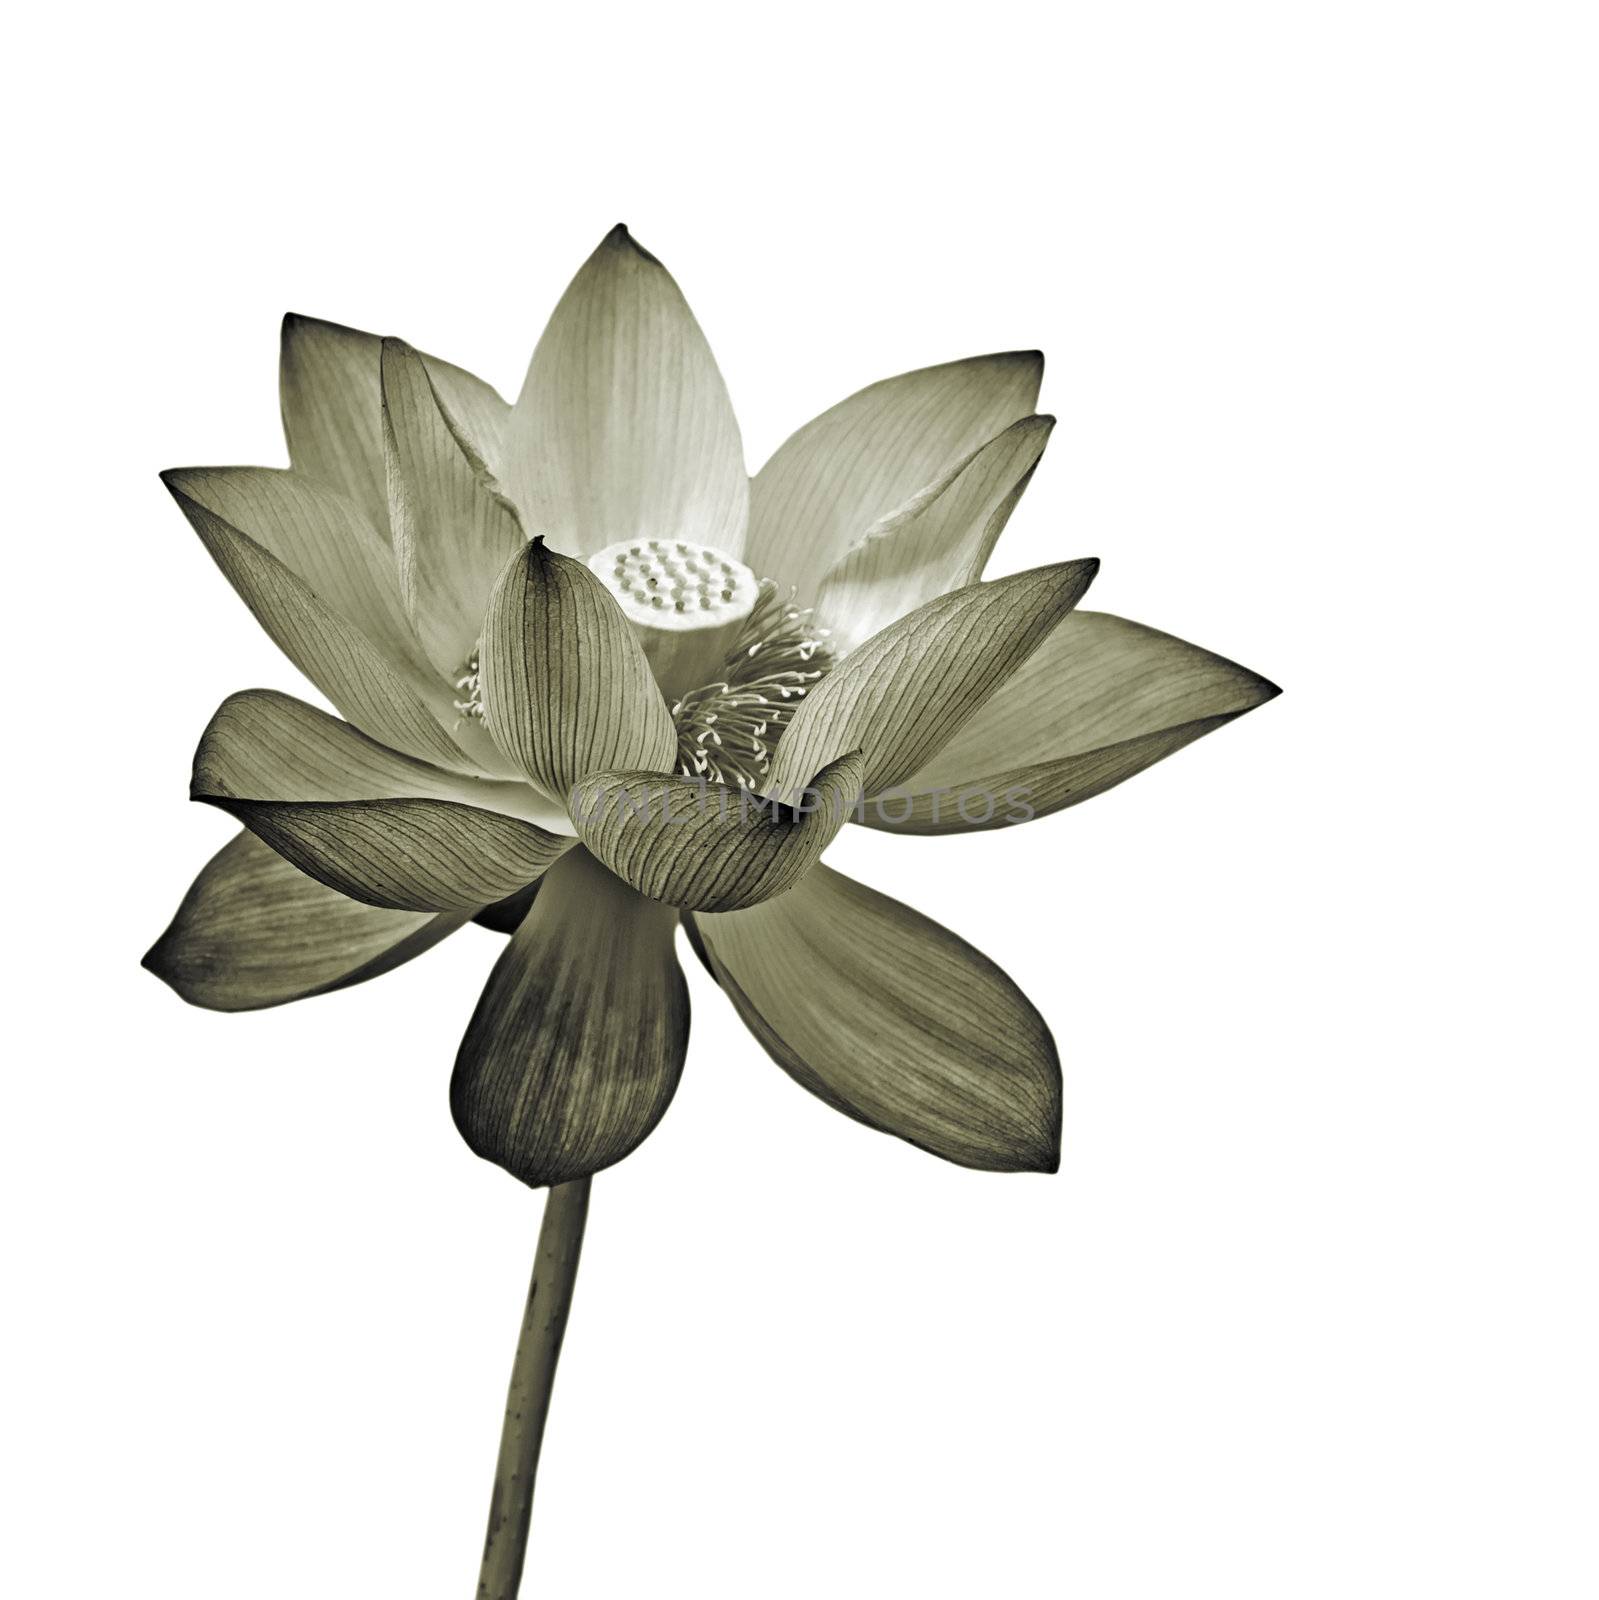 Lotus flower, isolated flora object on white background.